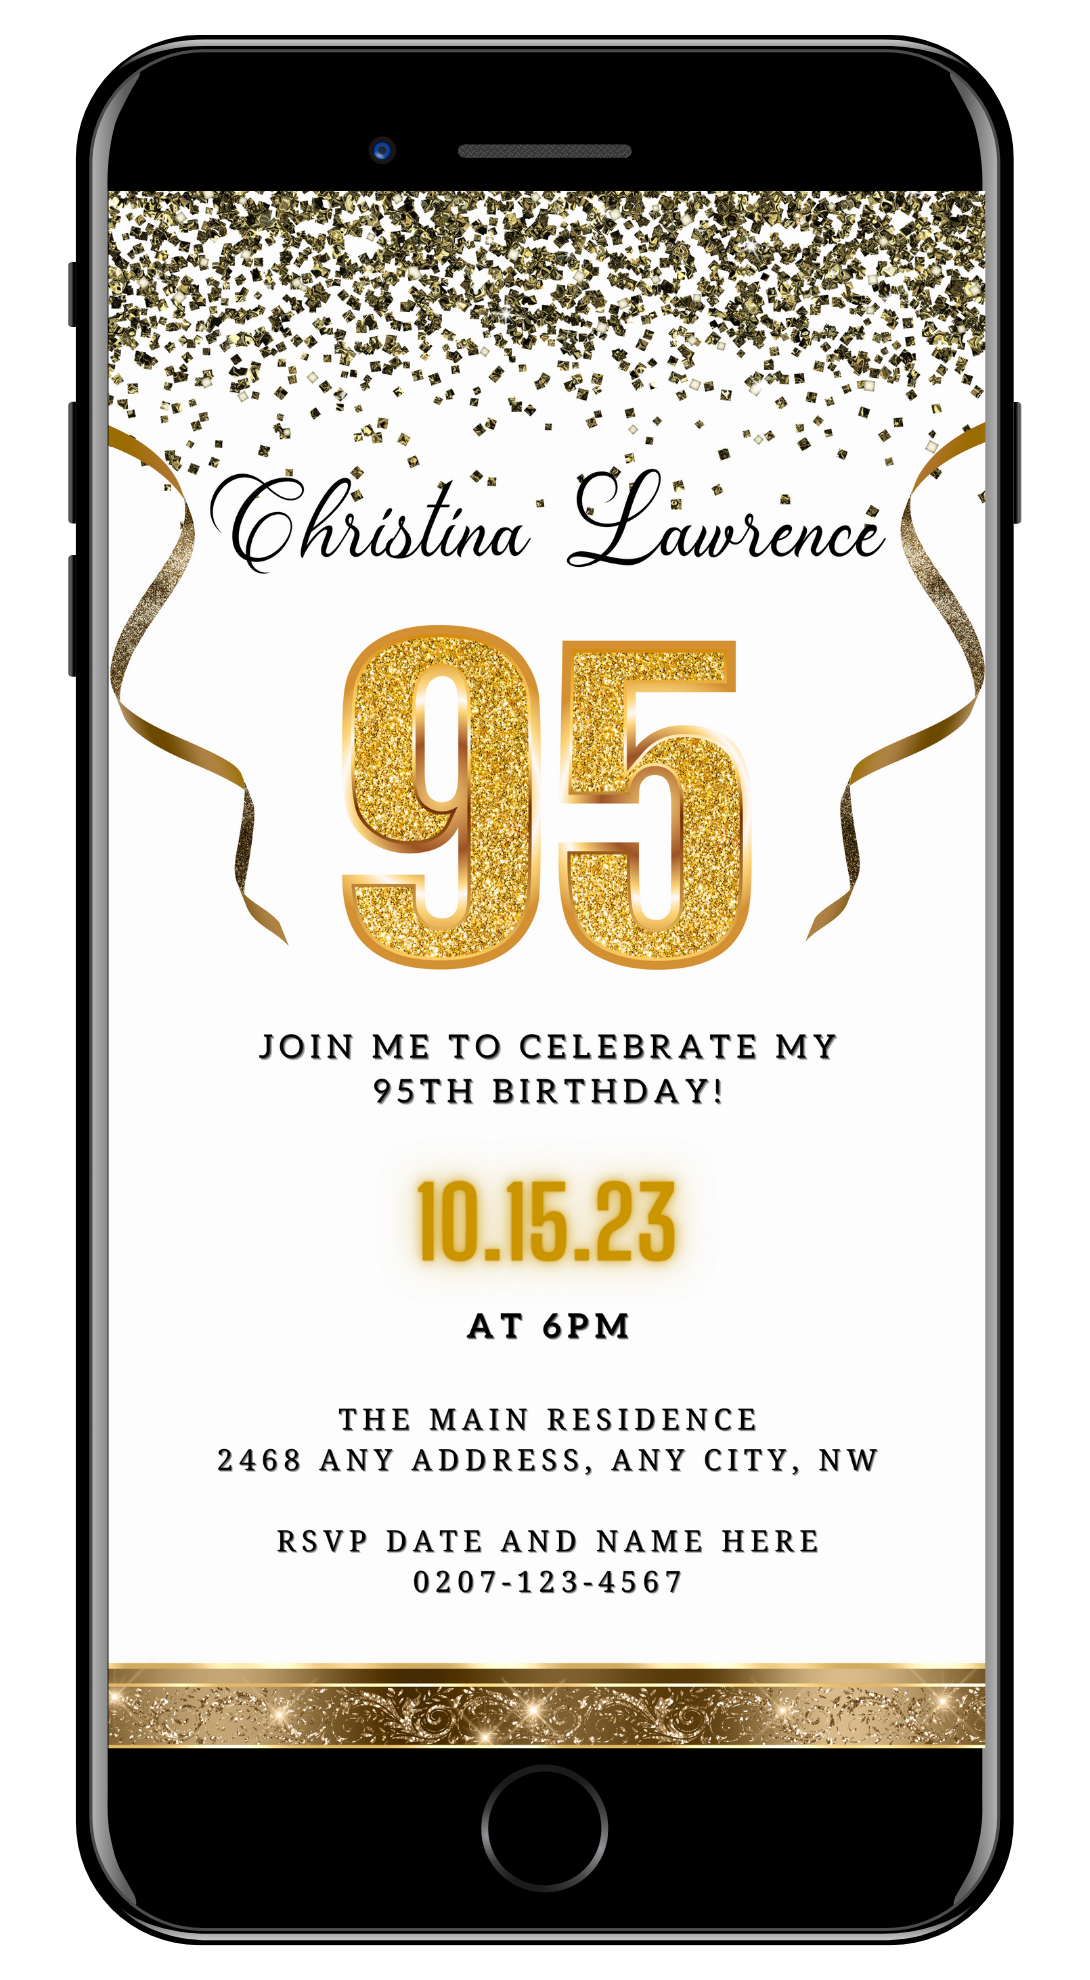 Customizable Digital White Gold Confetti 95th Birthday Evite displayed on a smartphone screen, featuring gold text and ribbon accents.